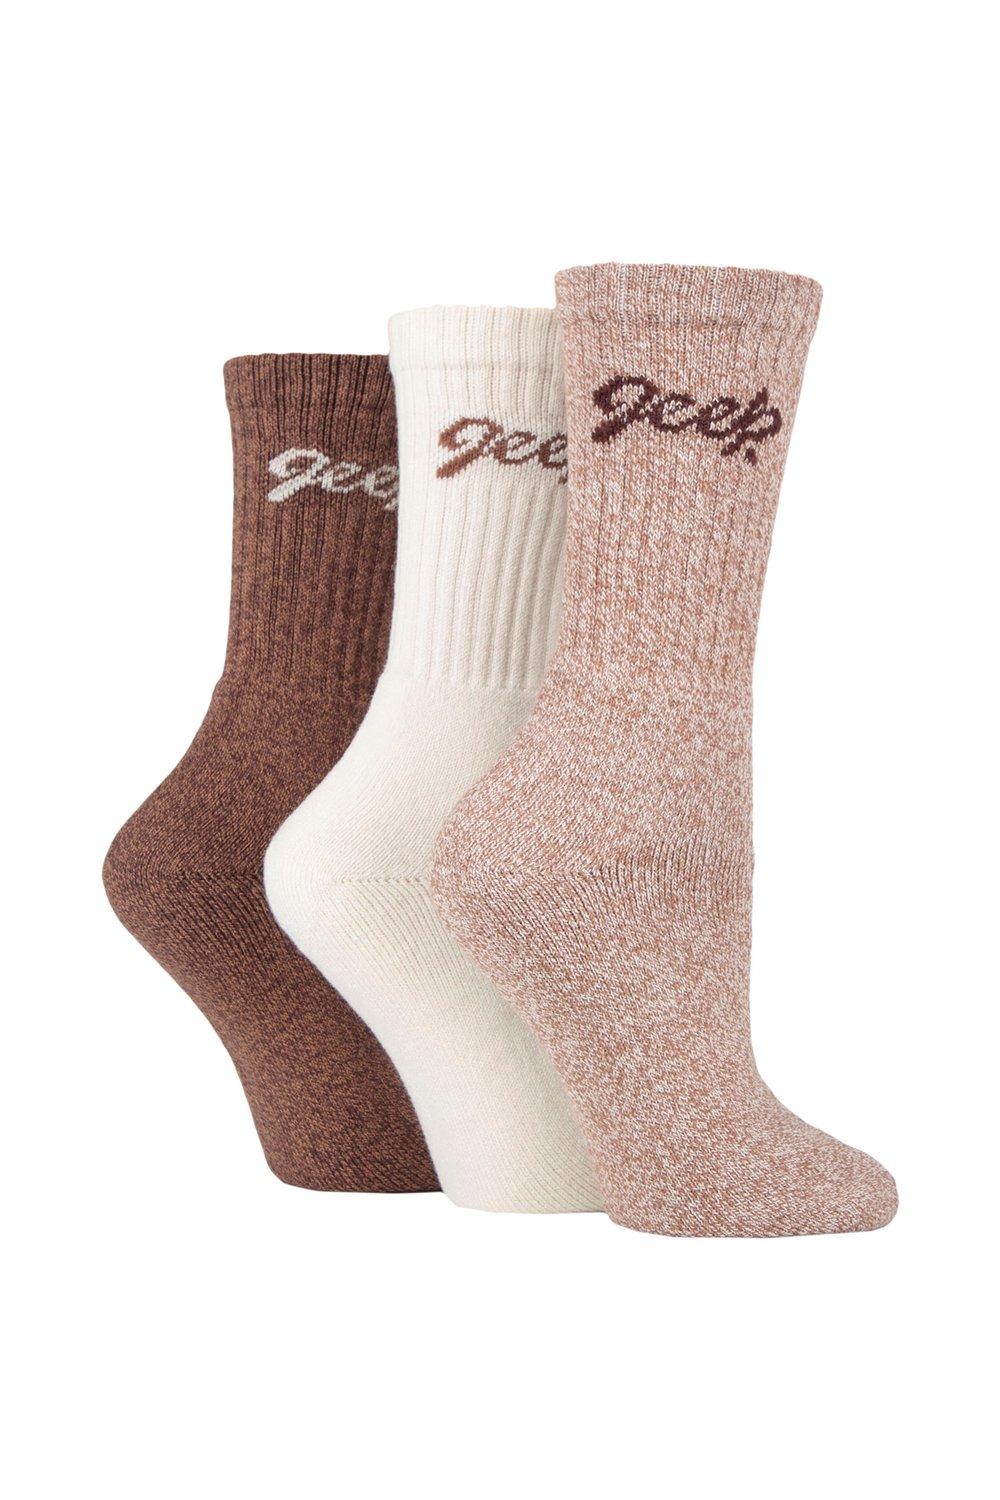 3 Pair Cushioned Foot Cotton Boot Socks